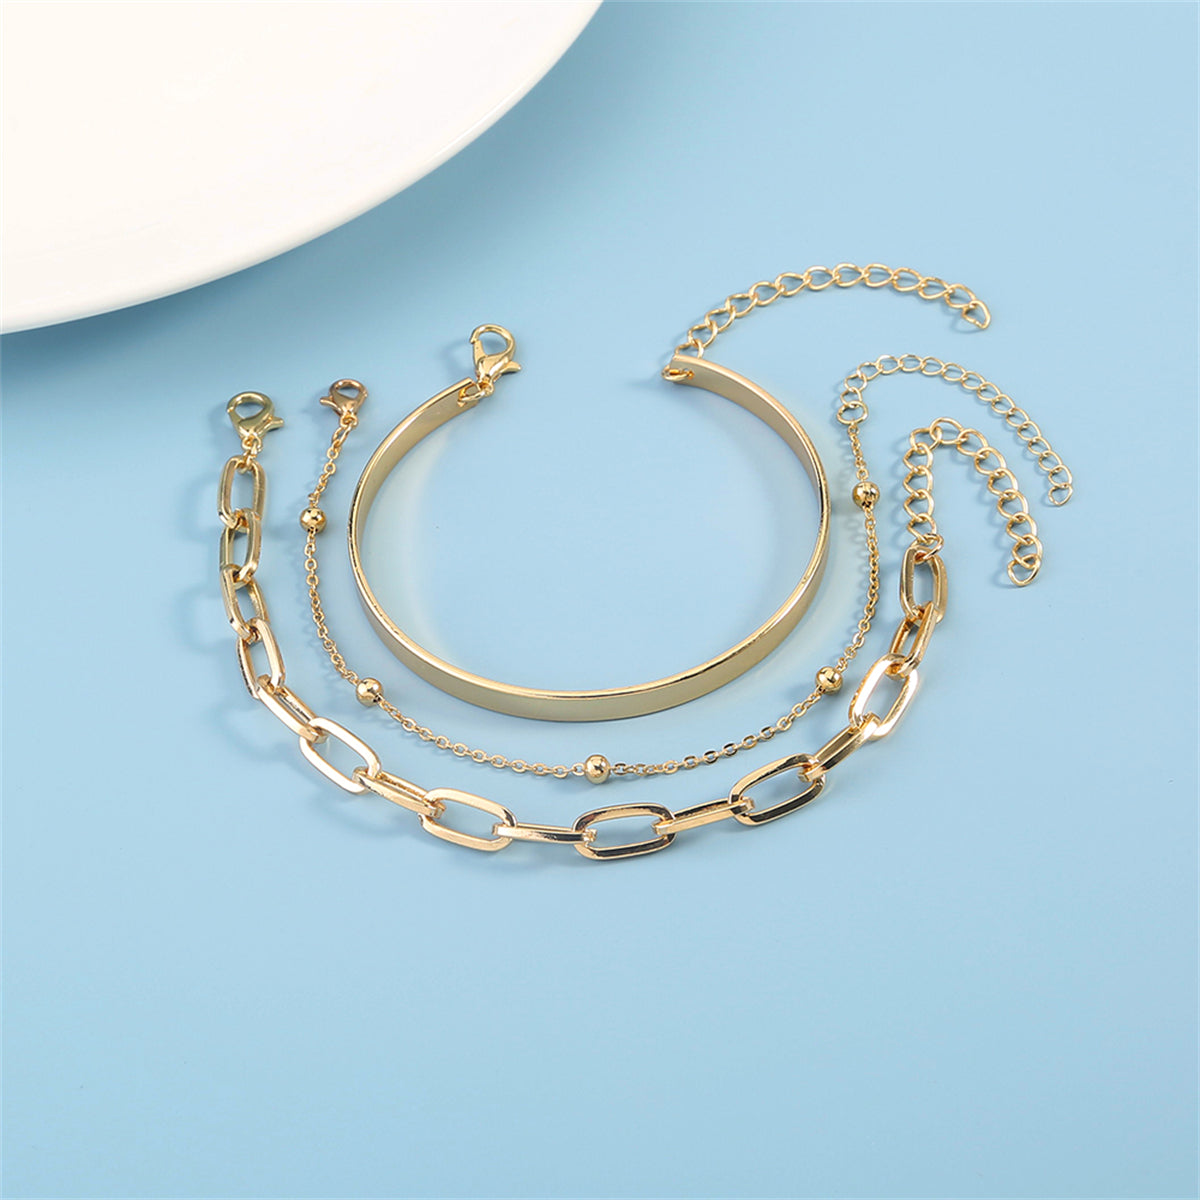 18K Gold-Plated Bead & Cable Chain Bracelet Set